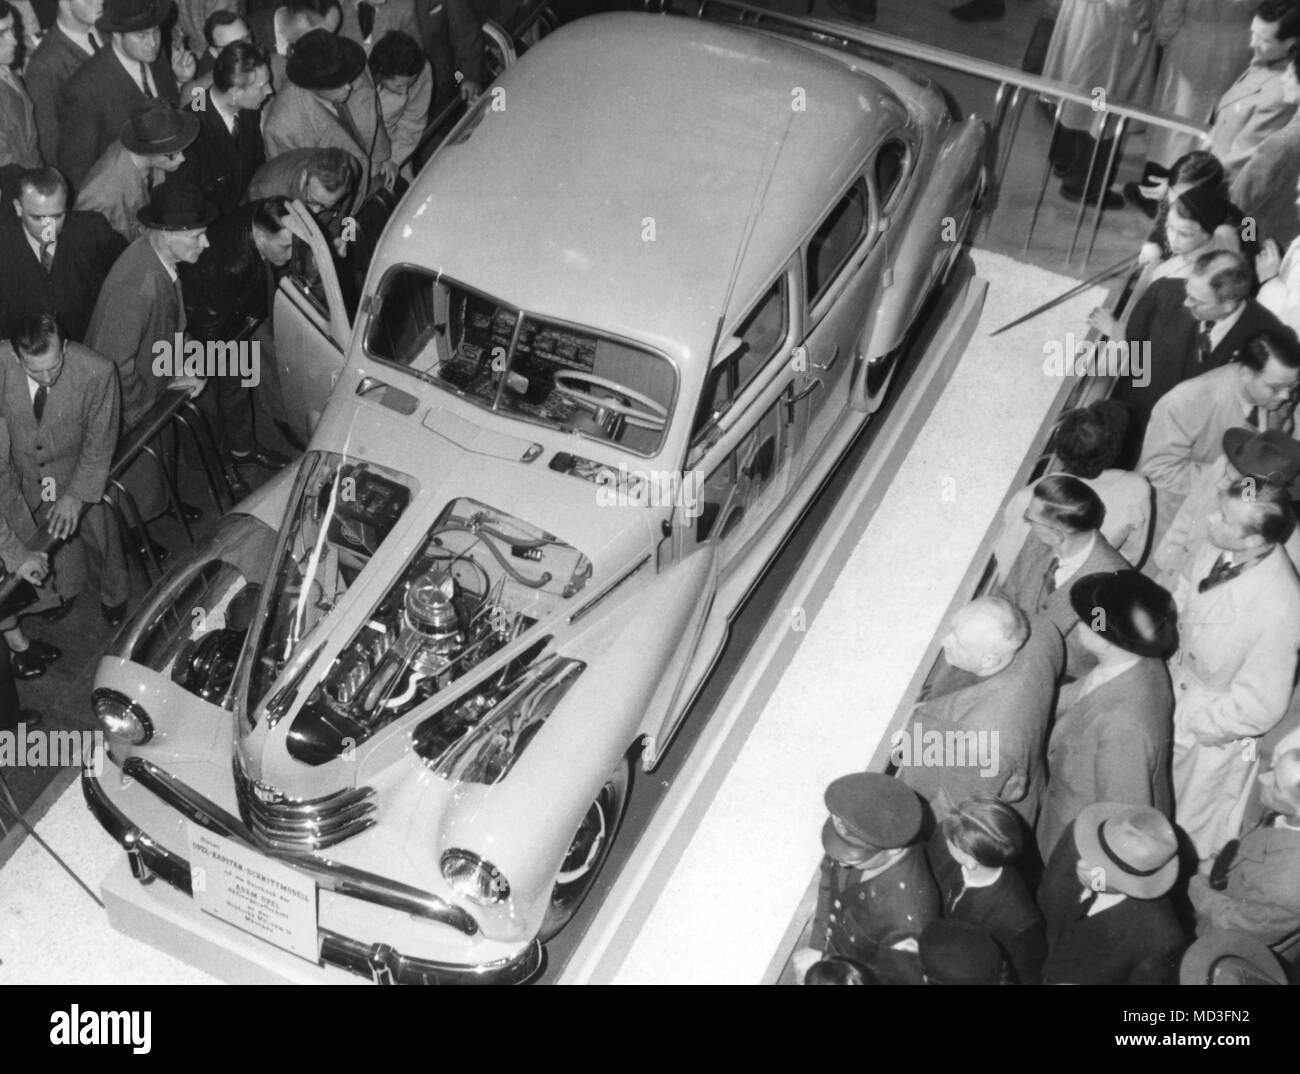 Visitors marvel at a model of an Opel Kapitan car at the 36th International Motor Show in Frankfurt am Main on 22.03.1953, where various parts of the body were cut out and replaced with Plexiglas. So the engine, the suspension and the circuit of the car are also visible from the outside. After the exhibition, this model will be exhibited at the Deutsches Museum in Munich. Photo: Heinz-Jurgen Gottert     (c) dpa - report     | usage worldwide Stock Photo